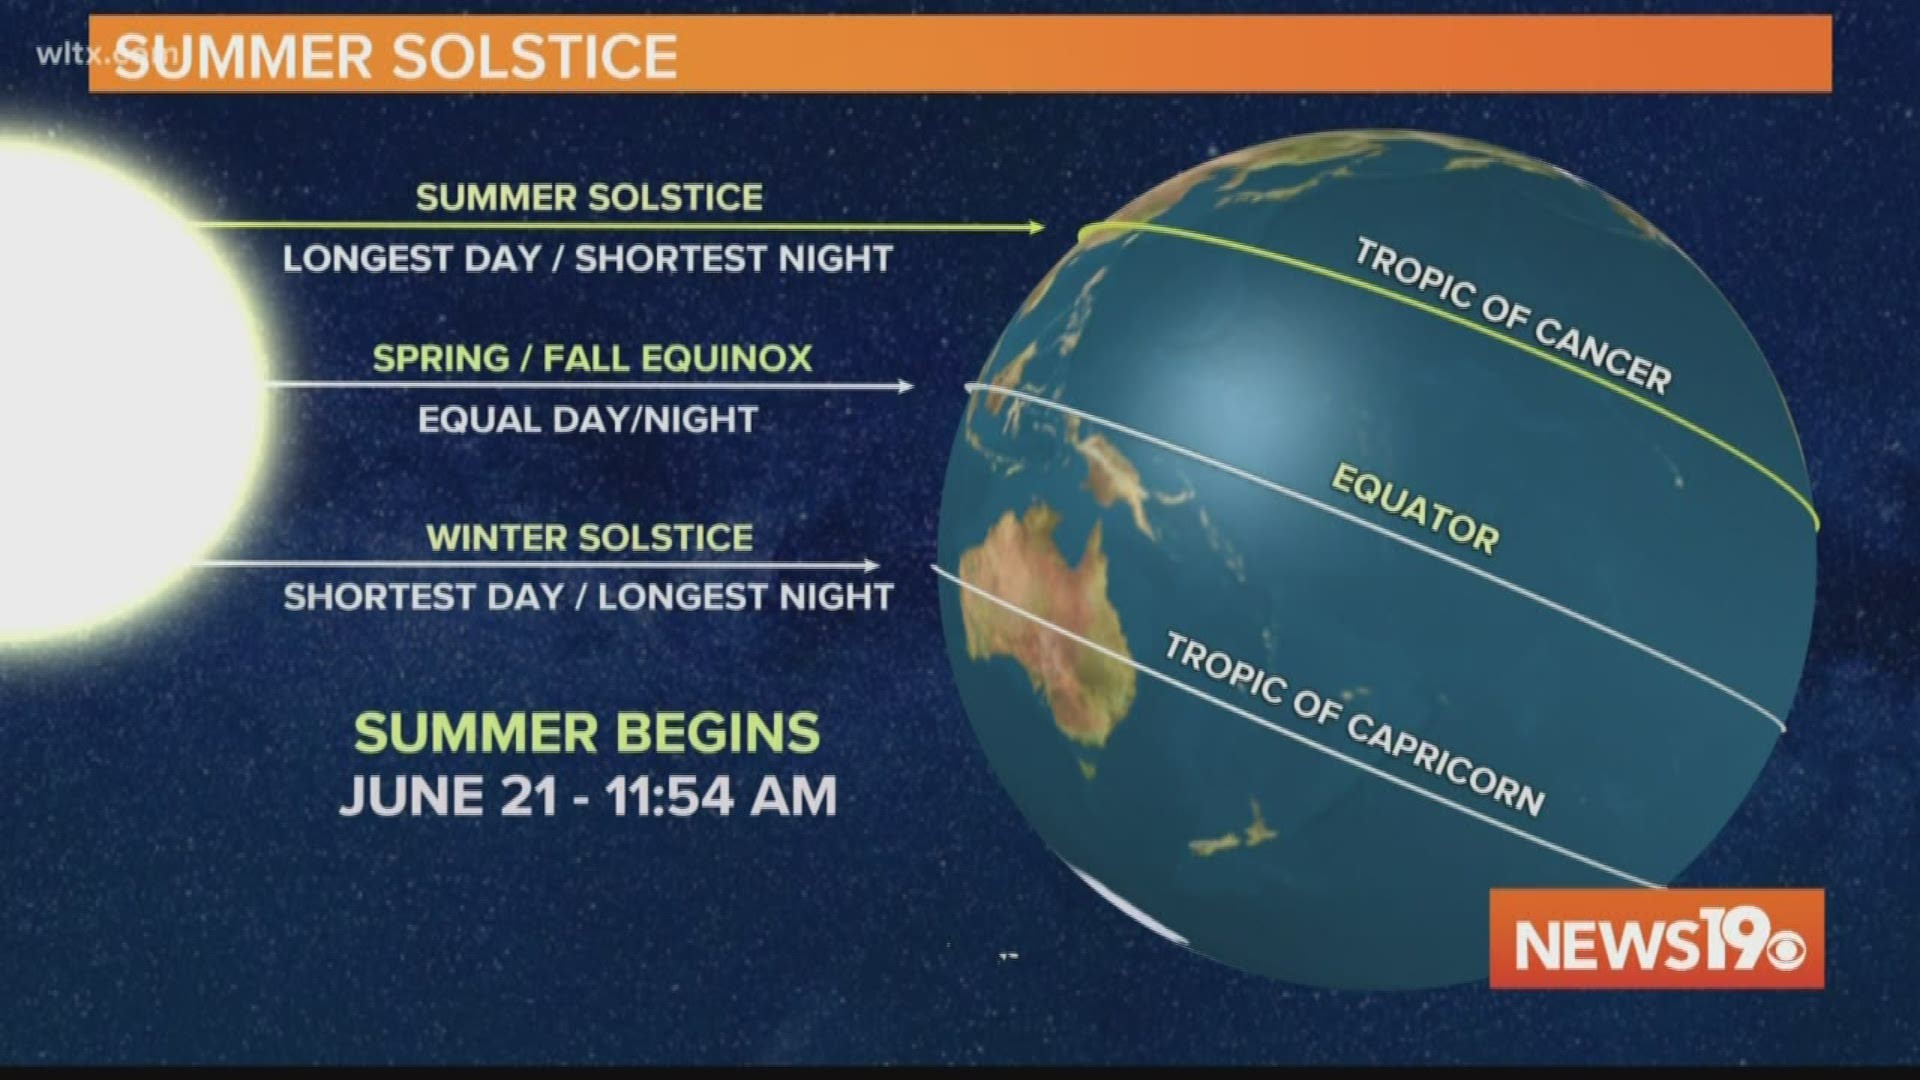 The summer solstice explained